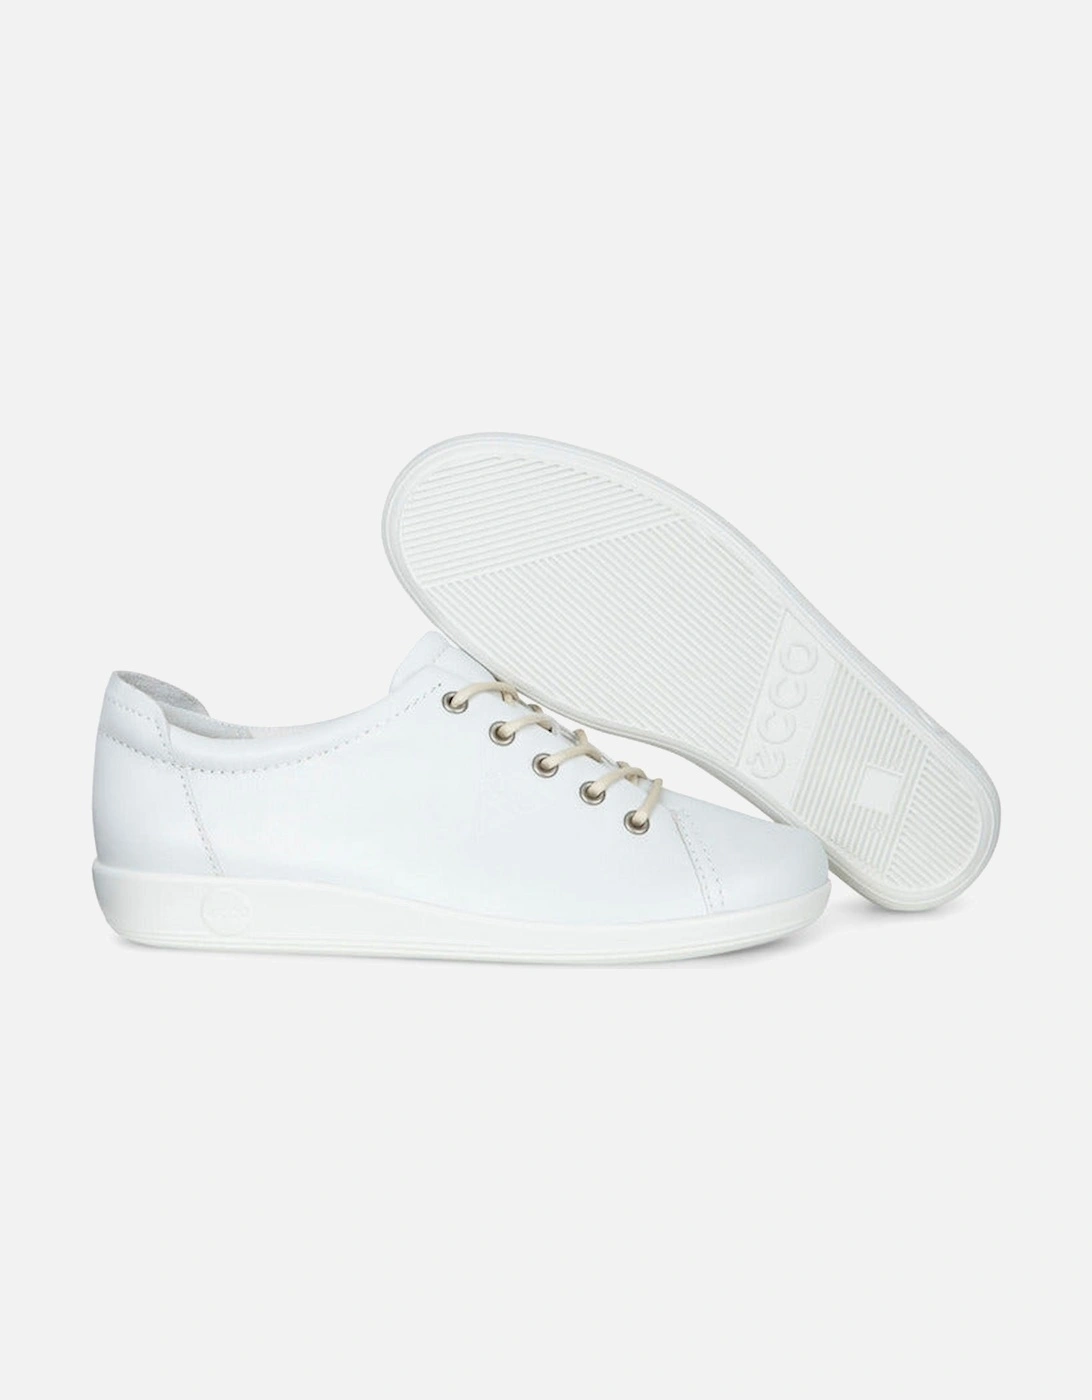 Womens Soft 2.0 206503 01007 in White Leather